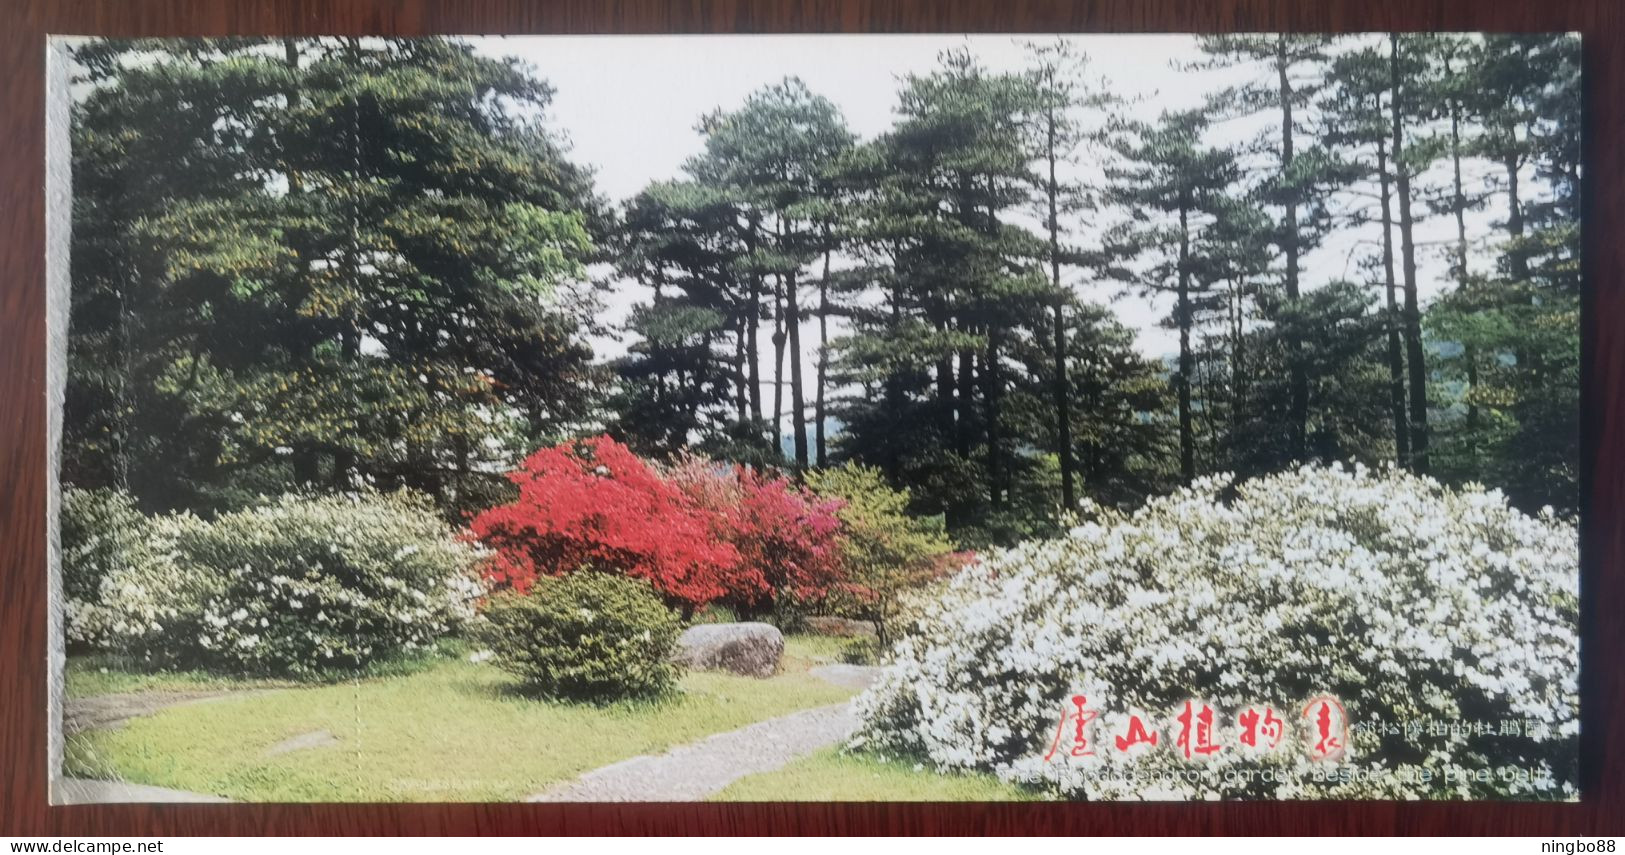 Rhododendron Simsii Flower Near Pine And Cypress Trees Park,China 1999 Lushan Botanical Garden Advert Pre-stamped Card - Trees